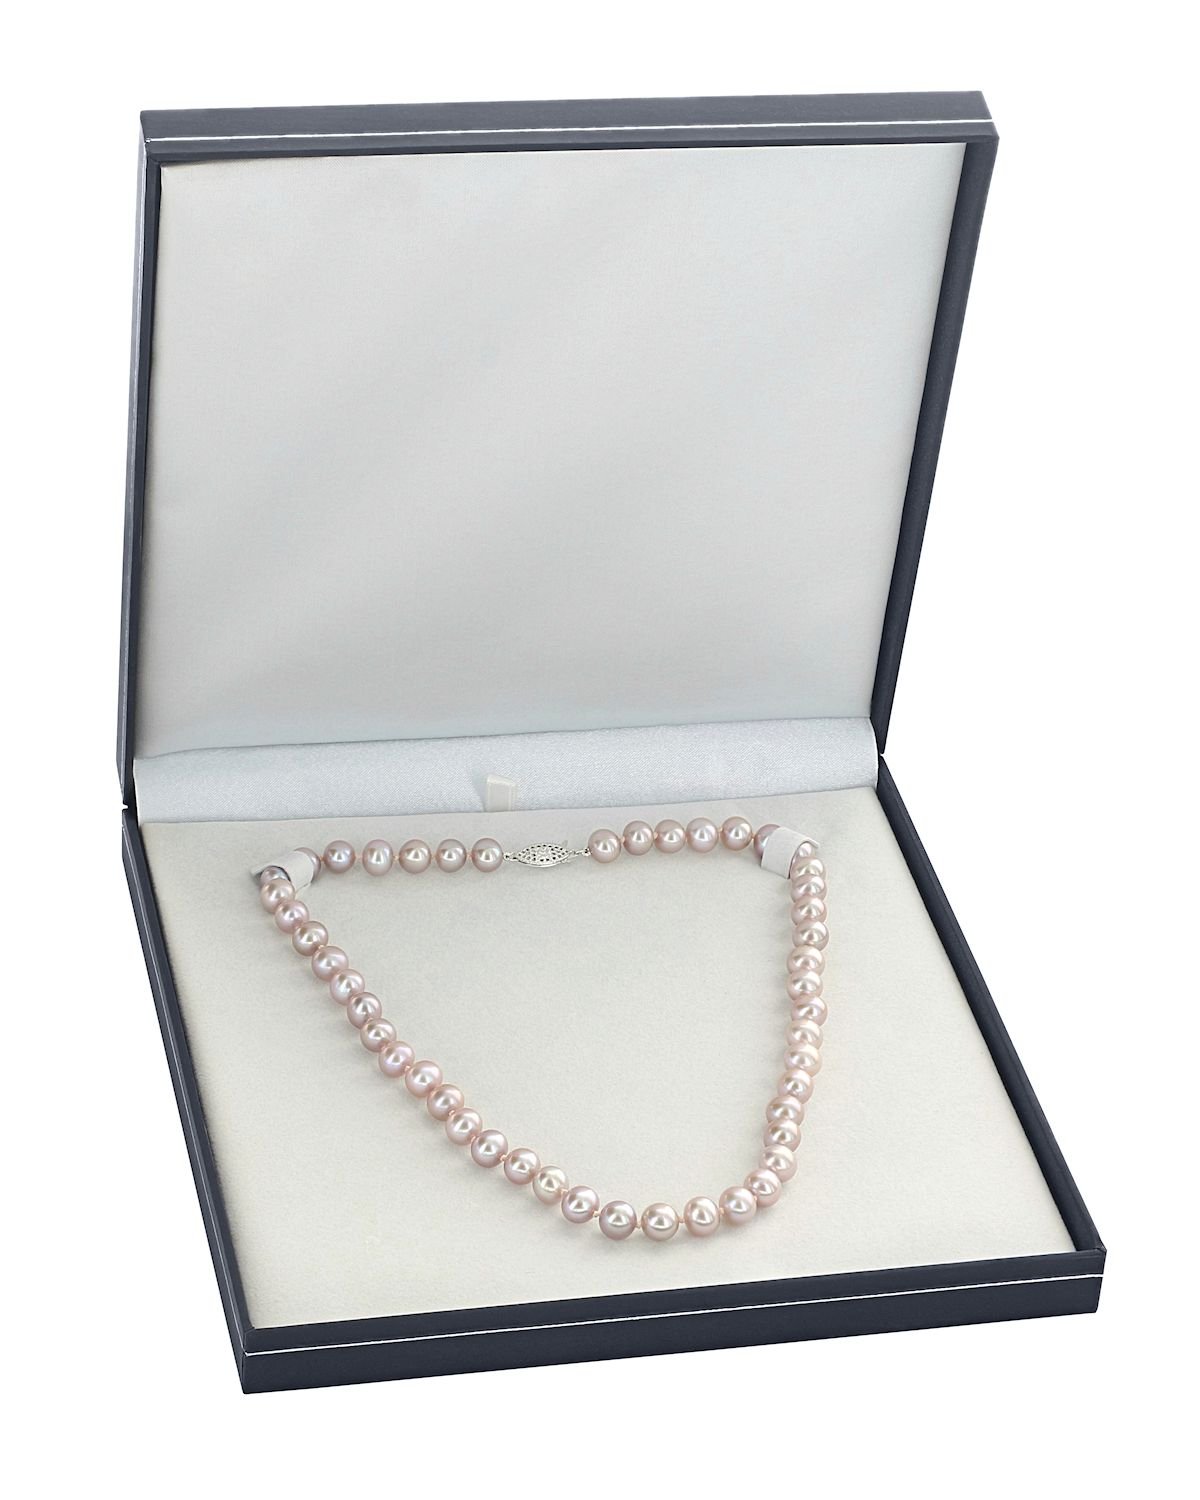 9.5-10.5mm Pink Freshwater Pearl Necklace - AAA Quality - Third Image